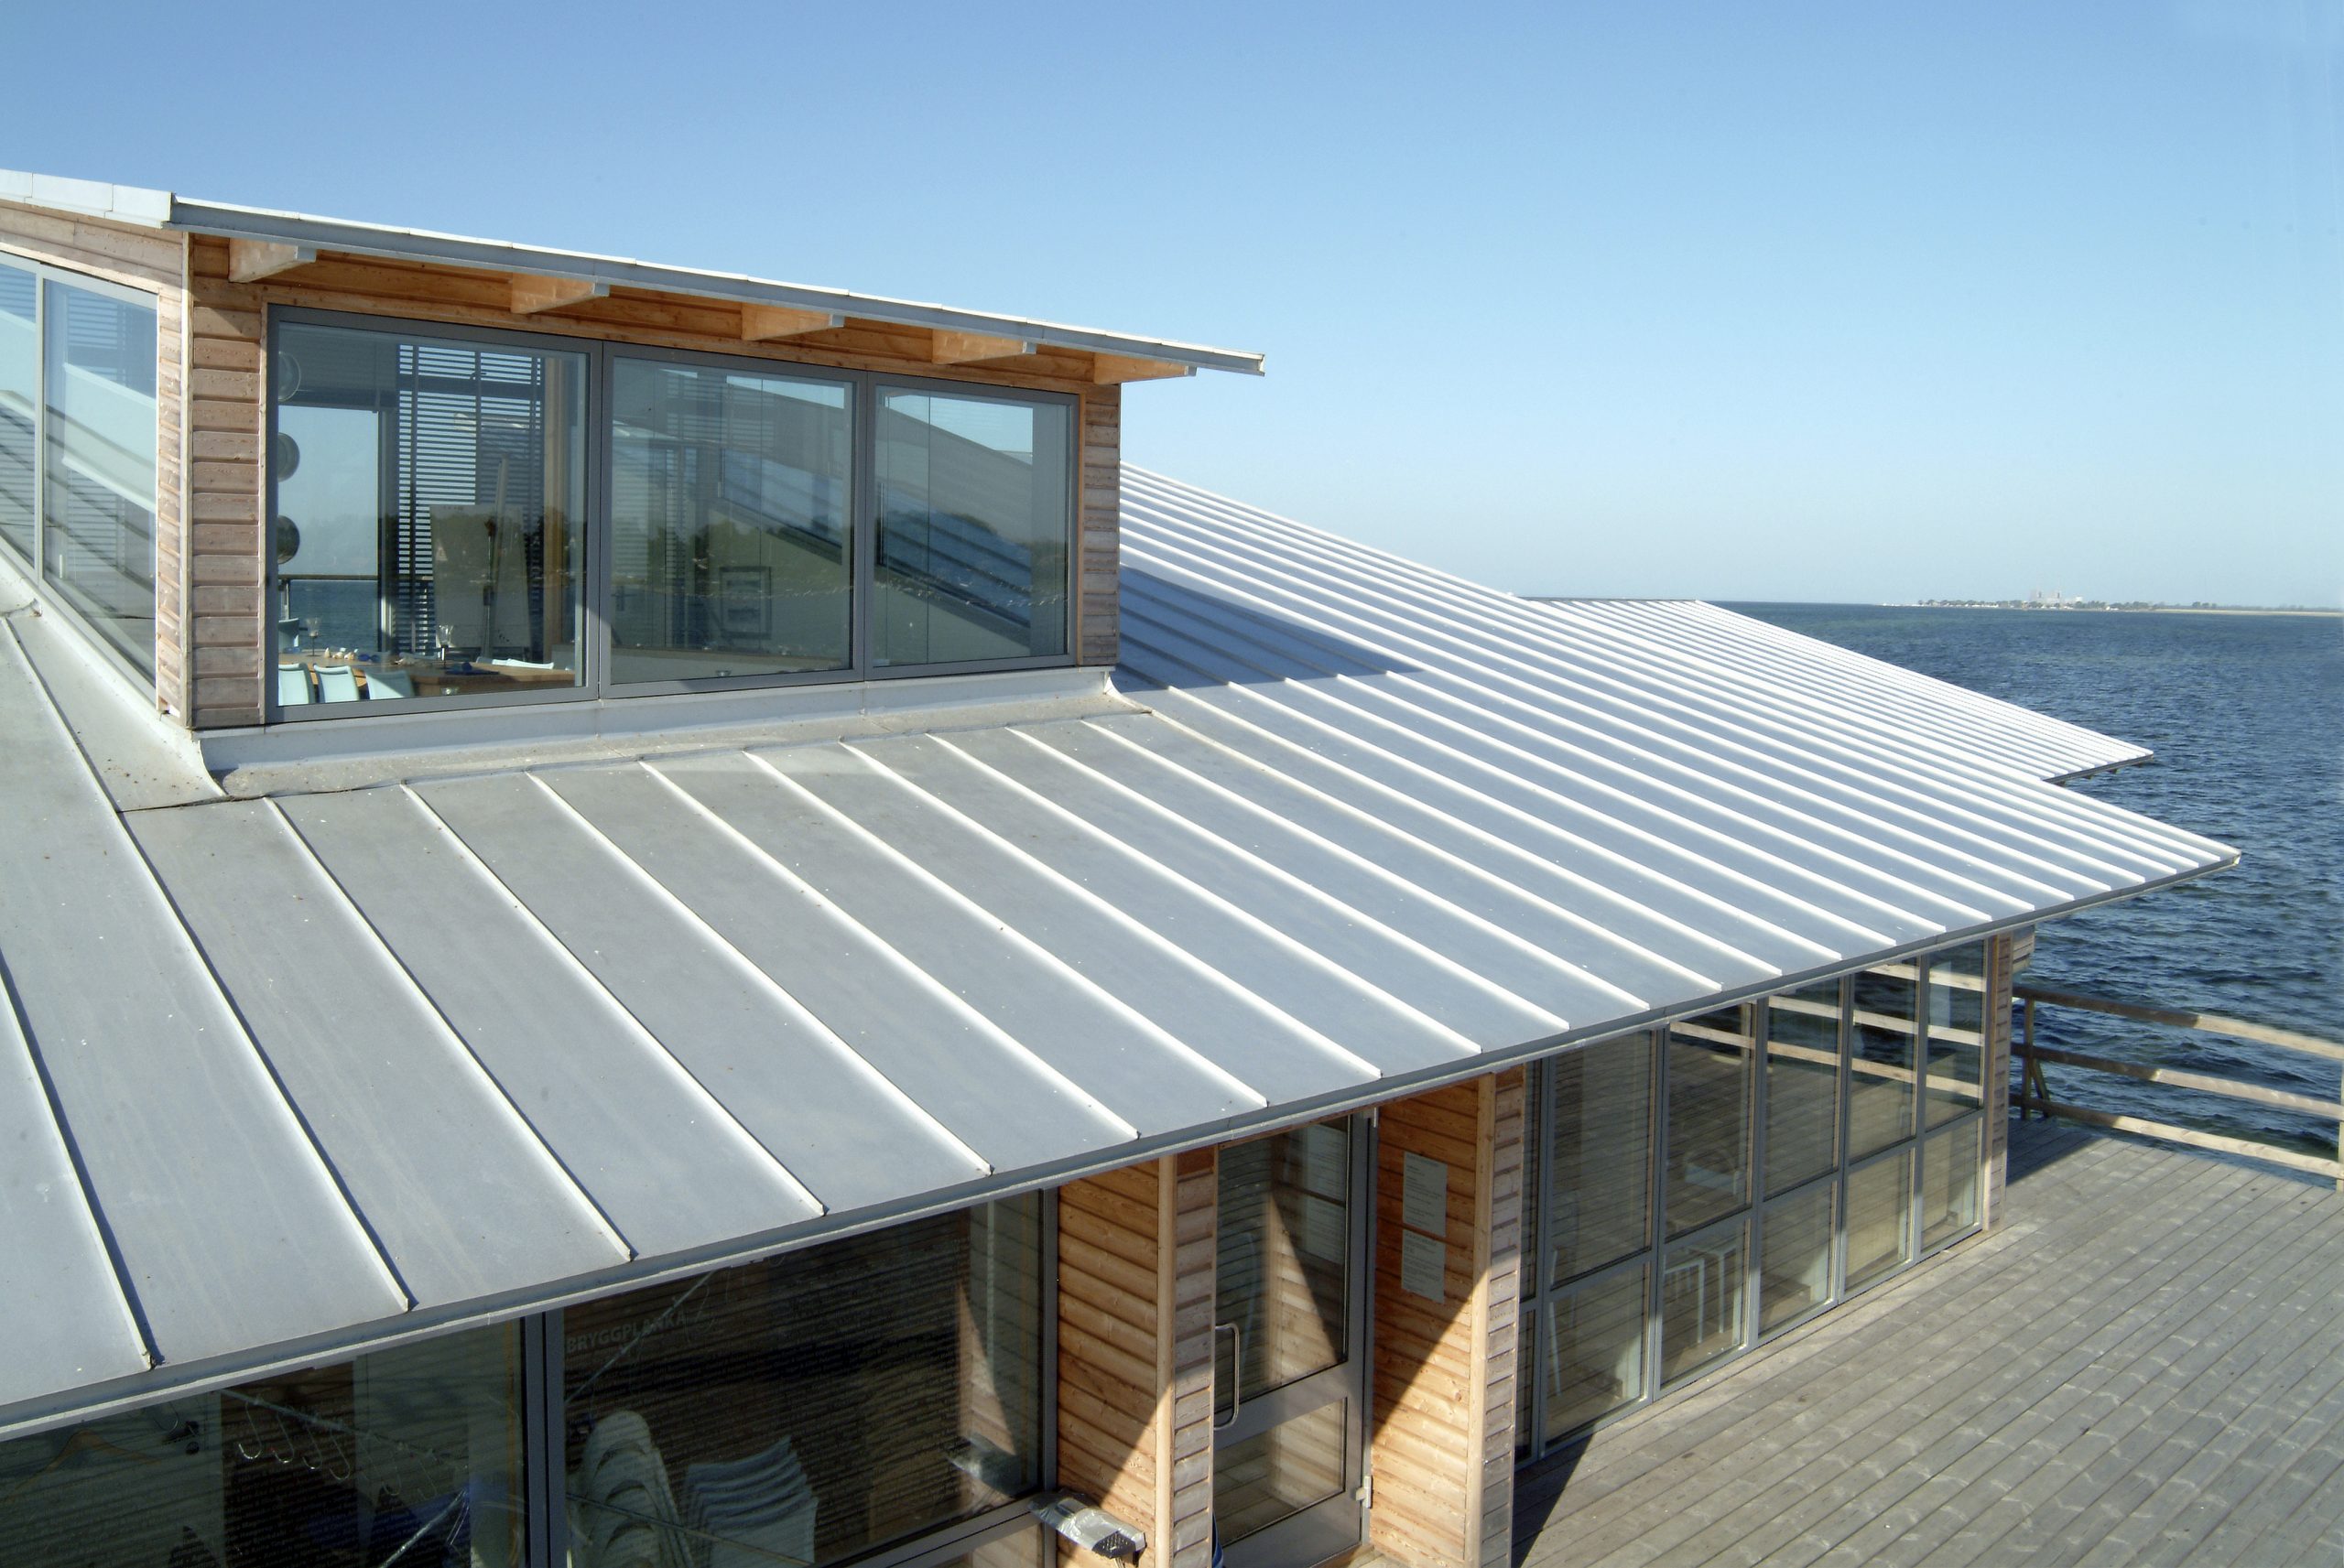 Metal Roof Colors: How to Select the Best Color for a New Metal Roof